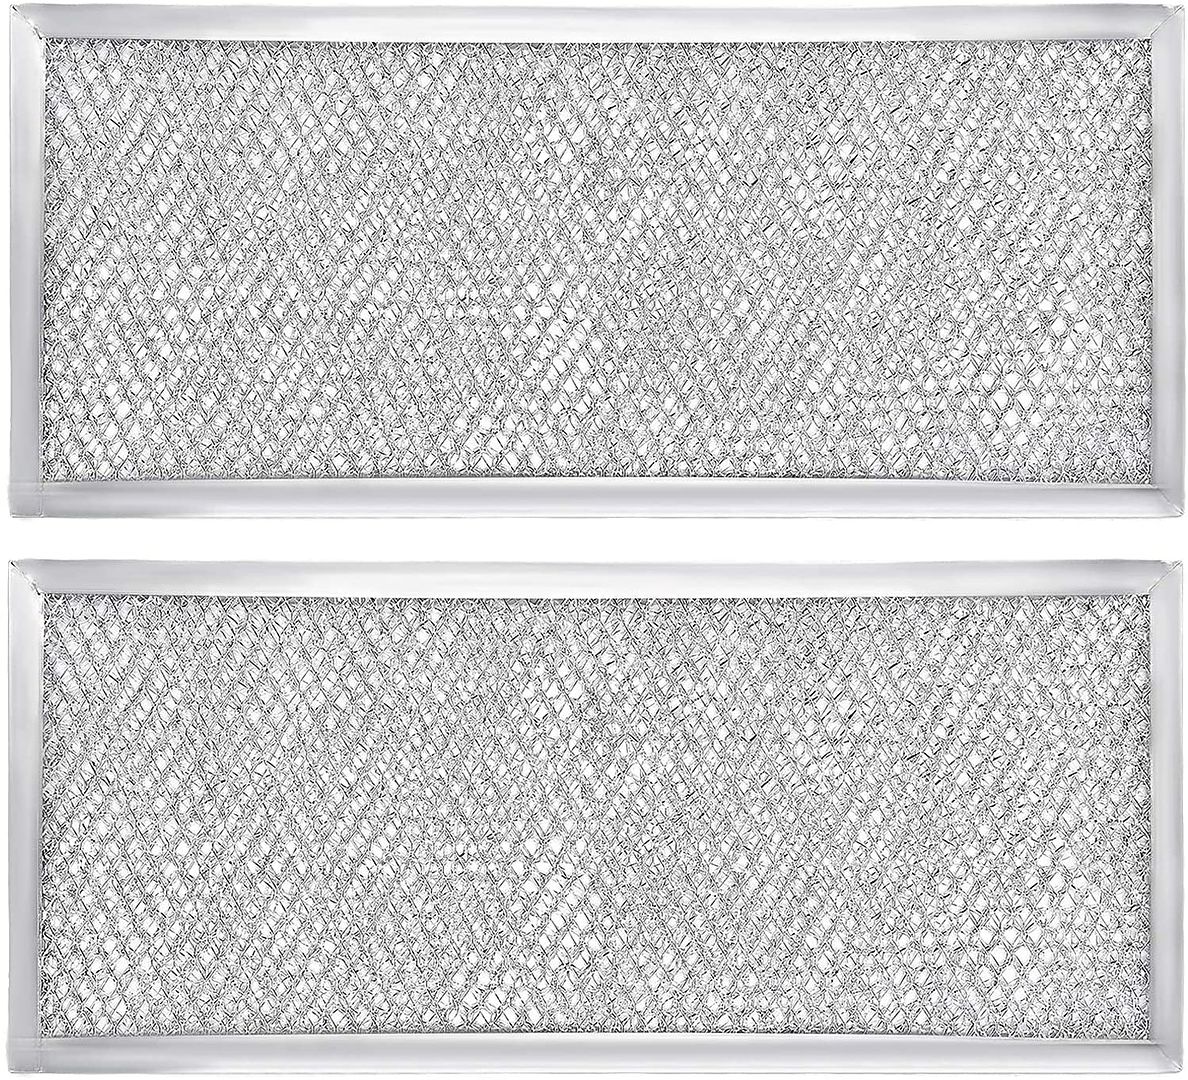 Fetechmate W10208631A Microwave Grease Filter, Microwave Filter 13x6 for whirlpool GE Microwaves